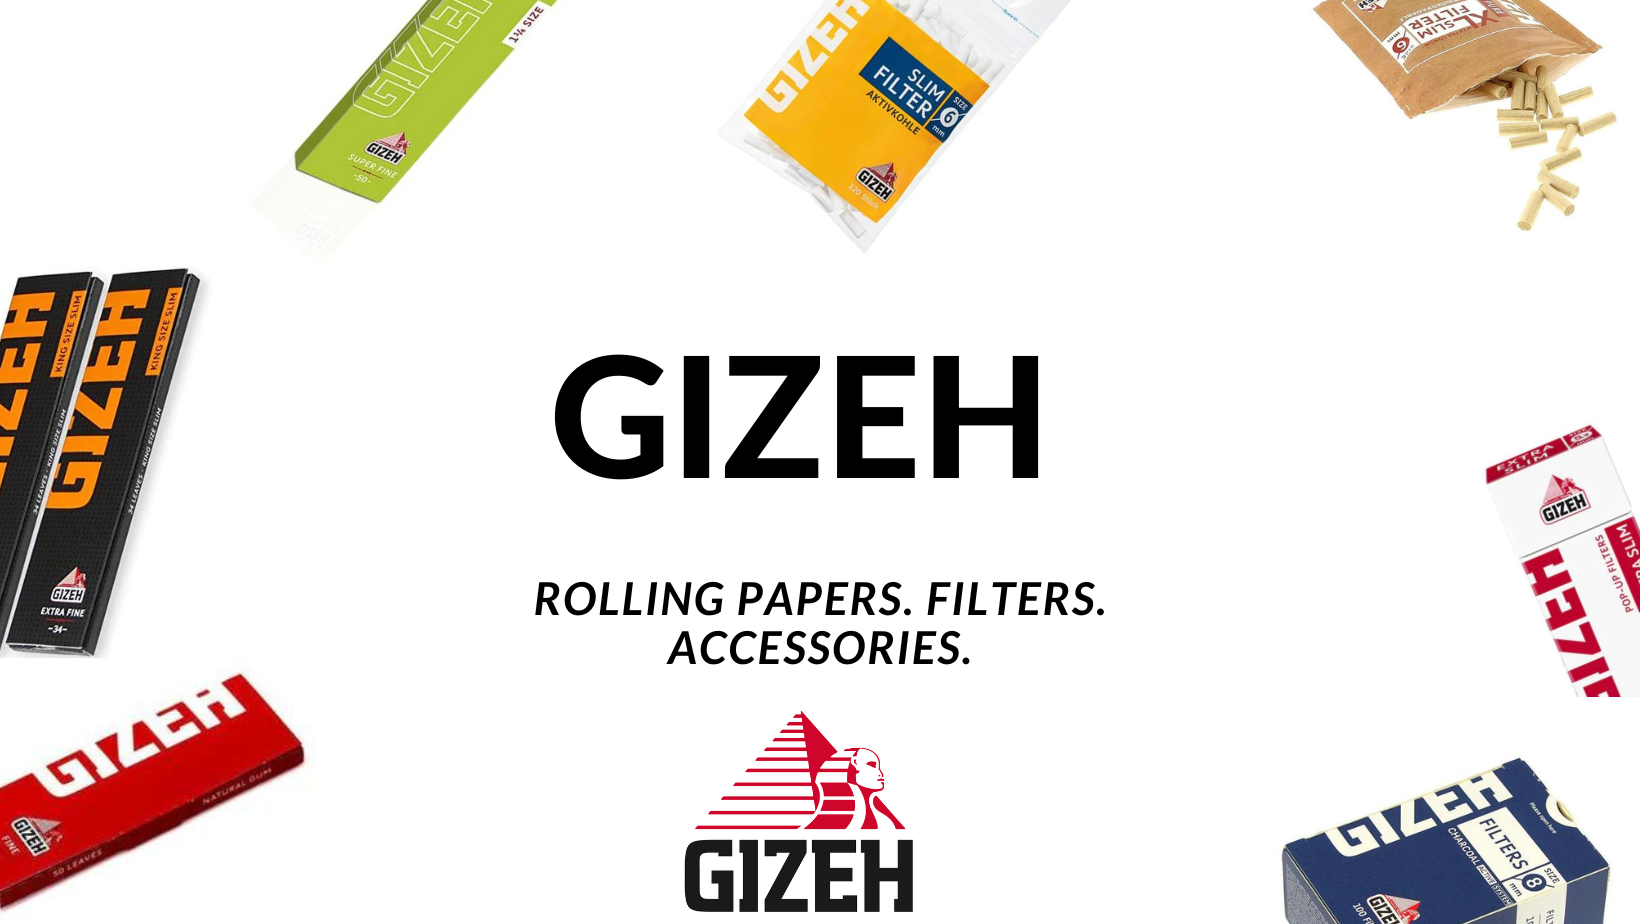 GIZEH SLIM POP UP FILTERS 6mm